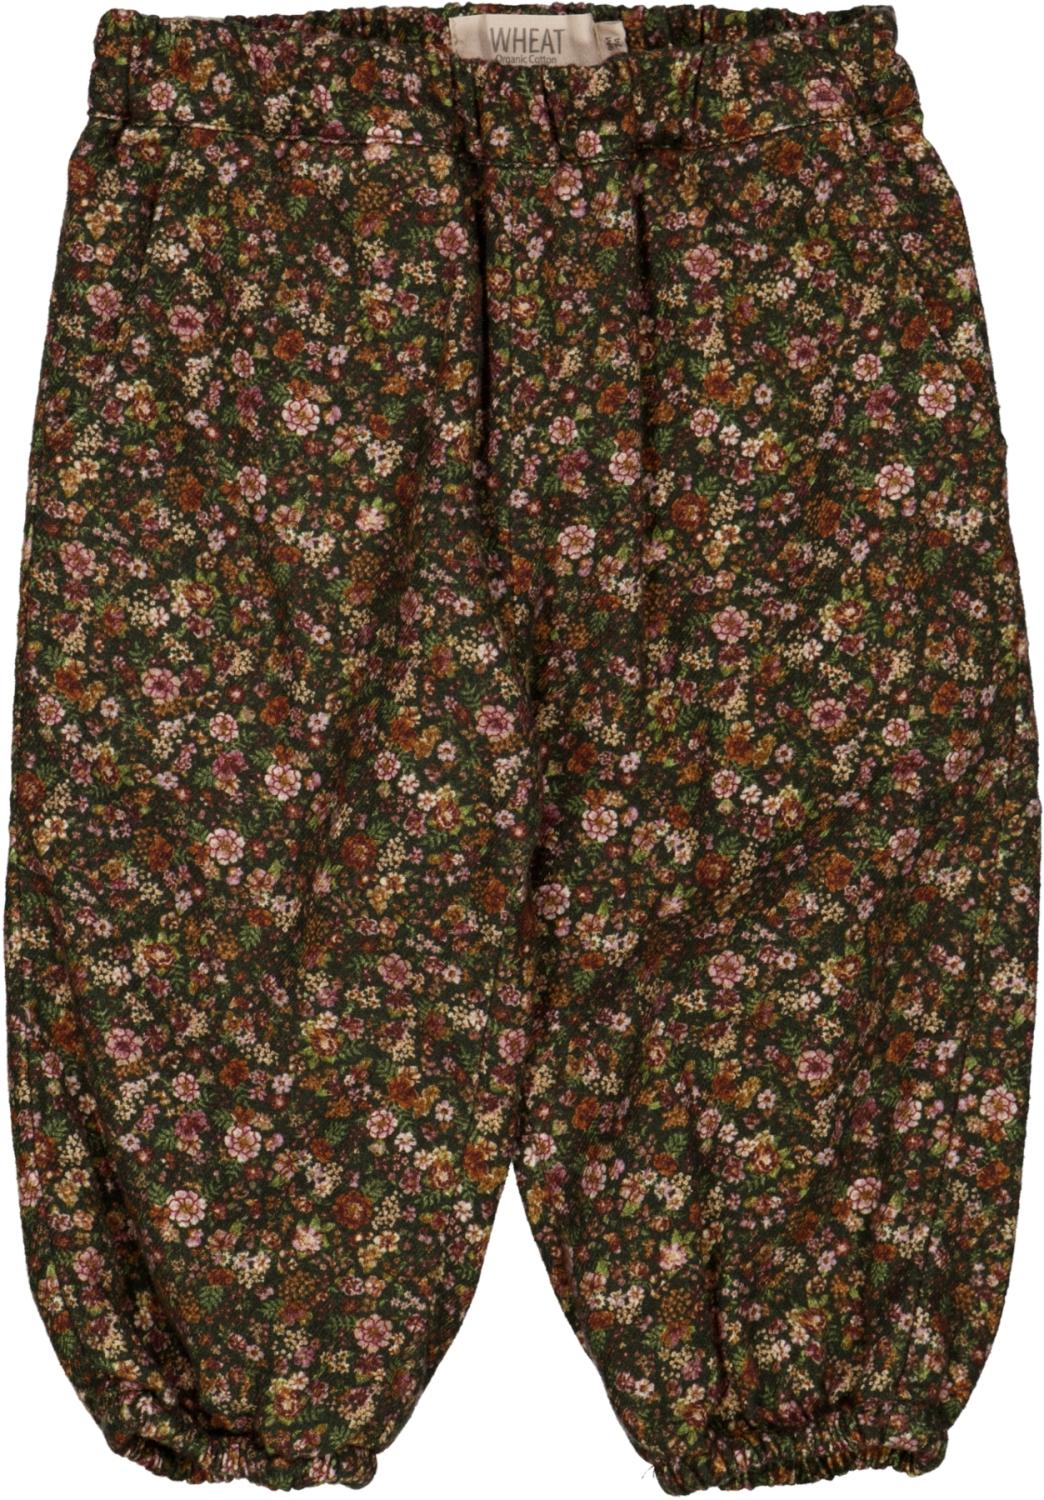 Trousers Malou Lined - Dark army flower baby